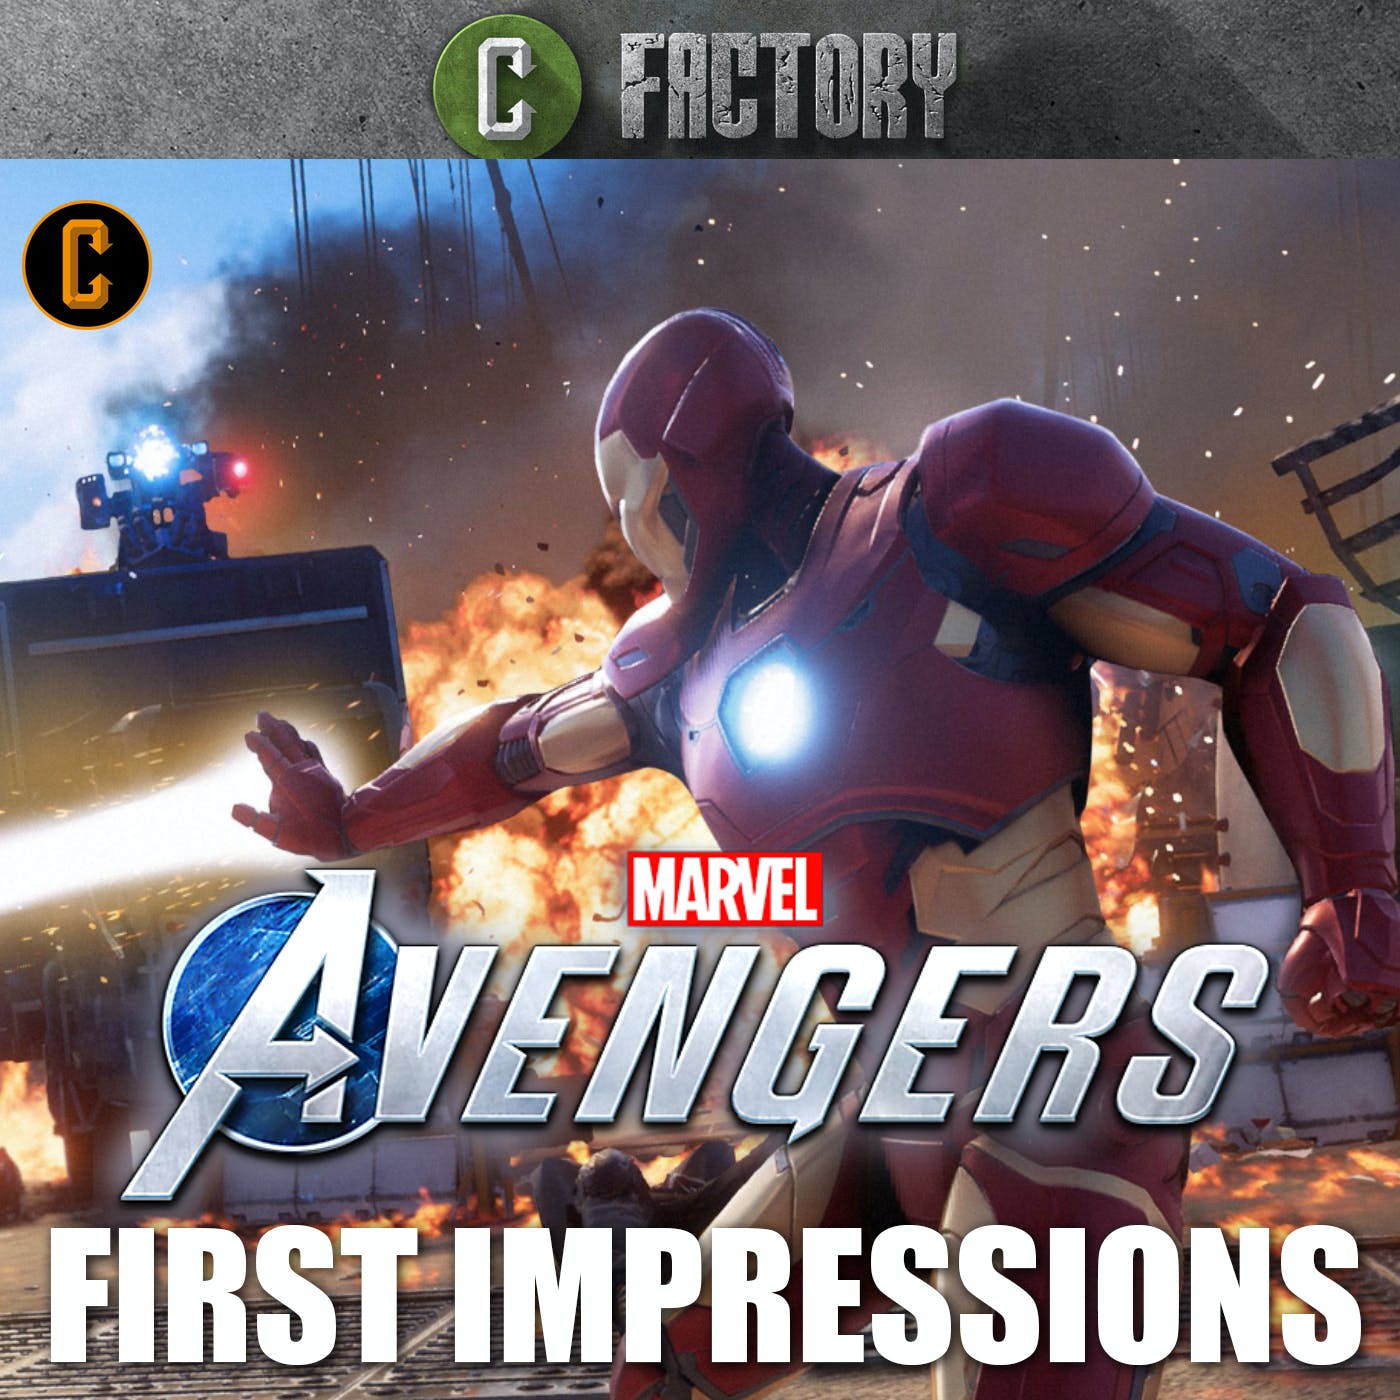 Marvel’s Avengers Beta First Impressions - Gameplay, Graphics & Customization Compared To Last Year